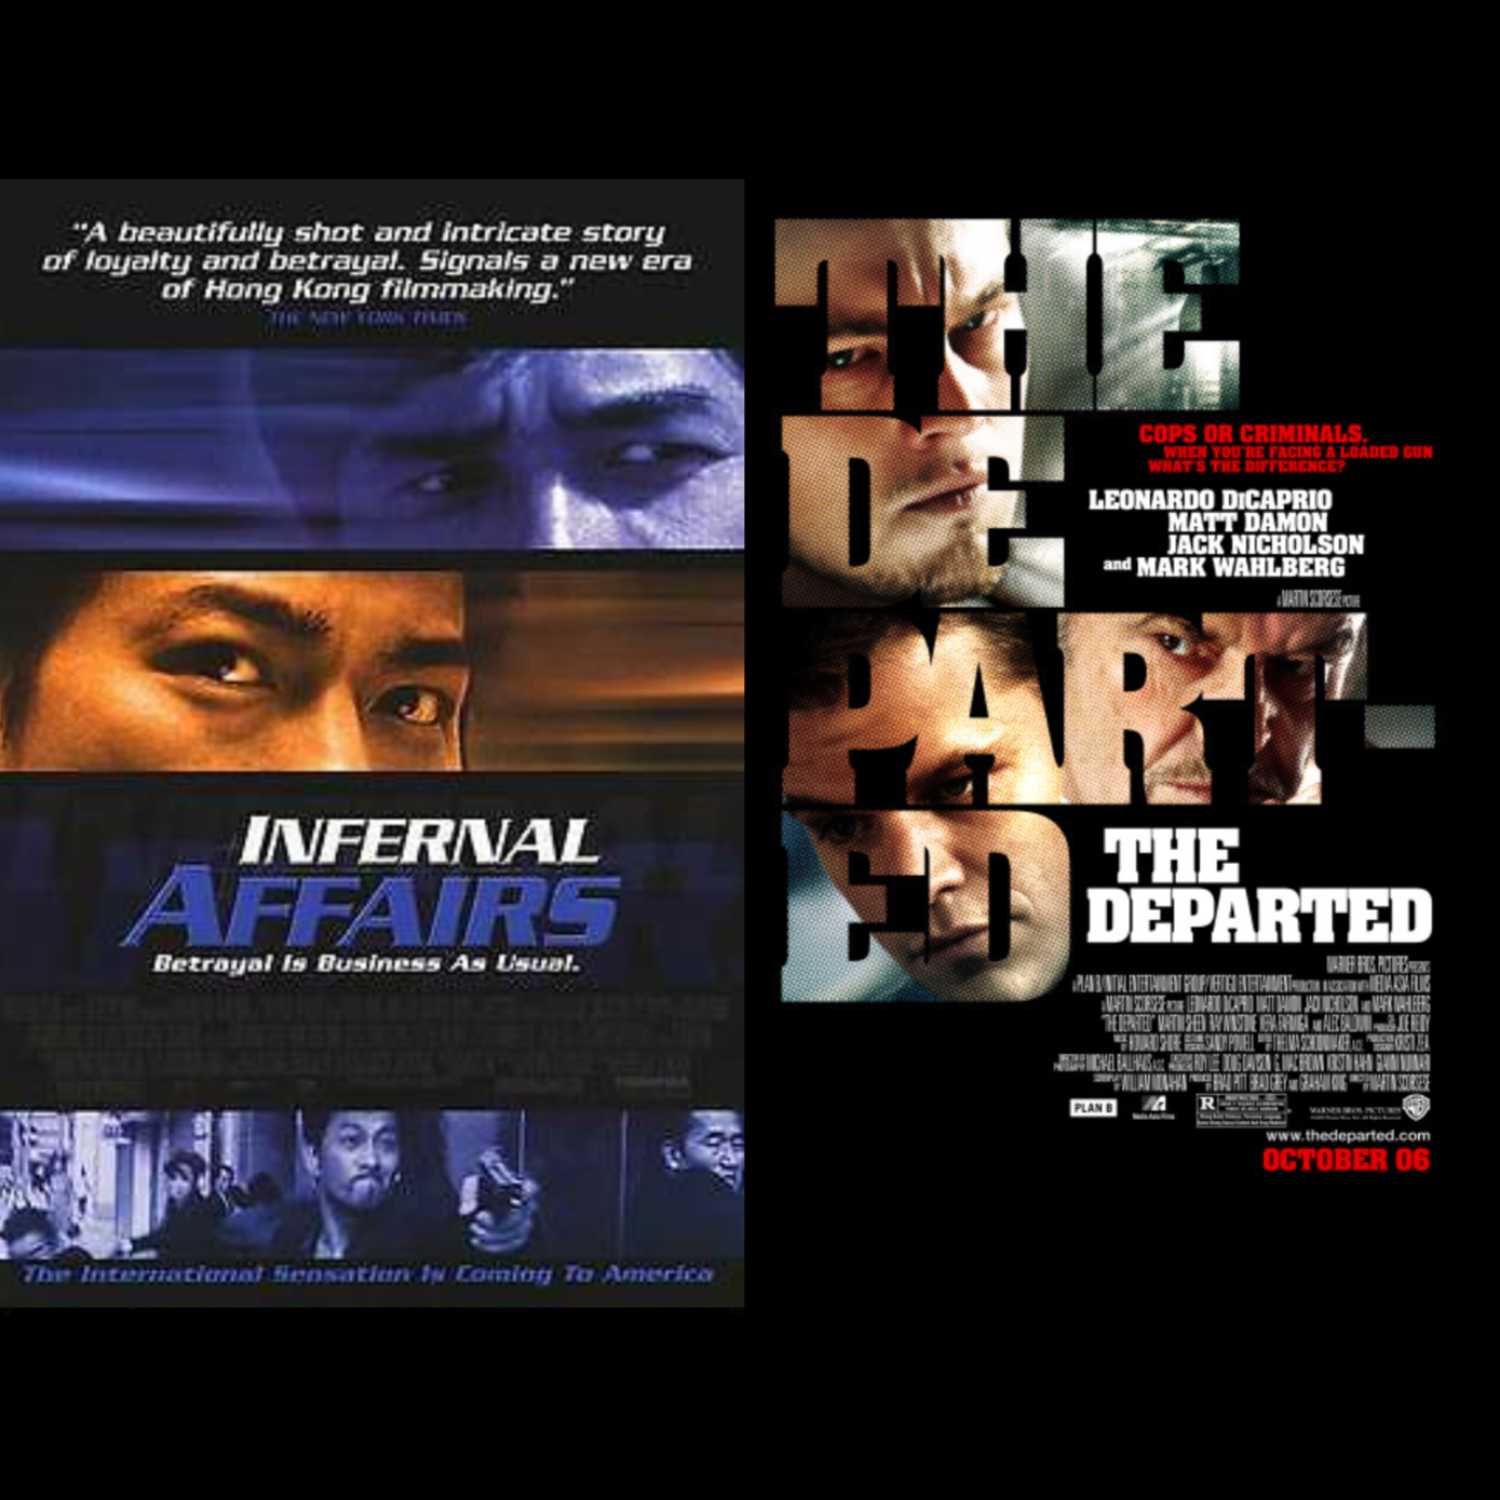 Infernal Affairs & The Departed